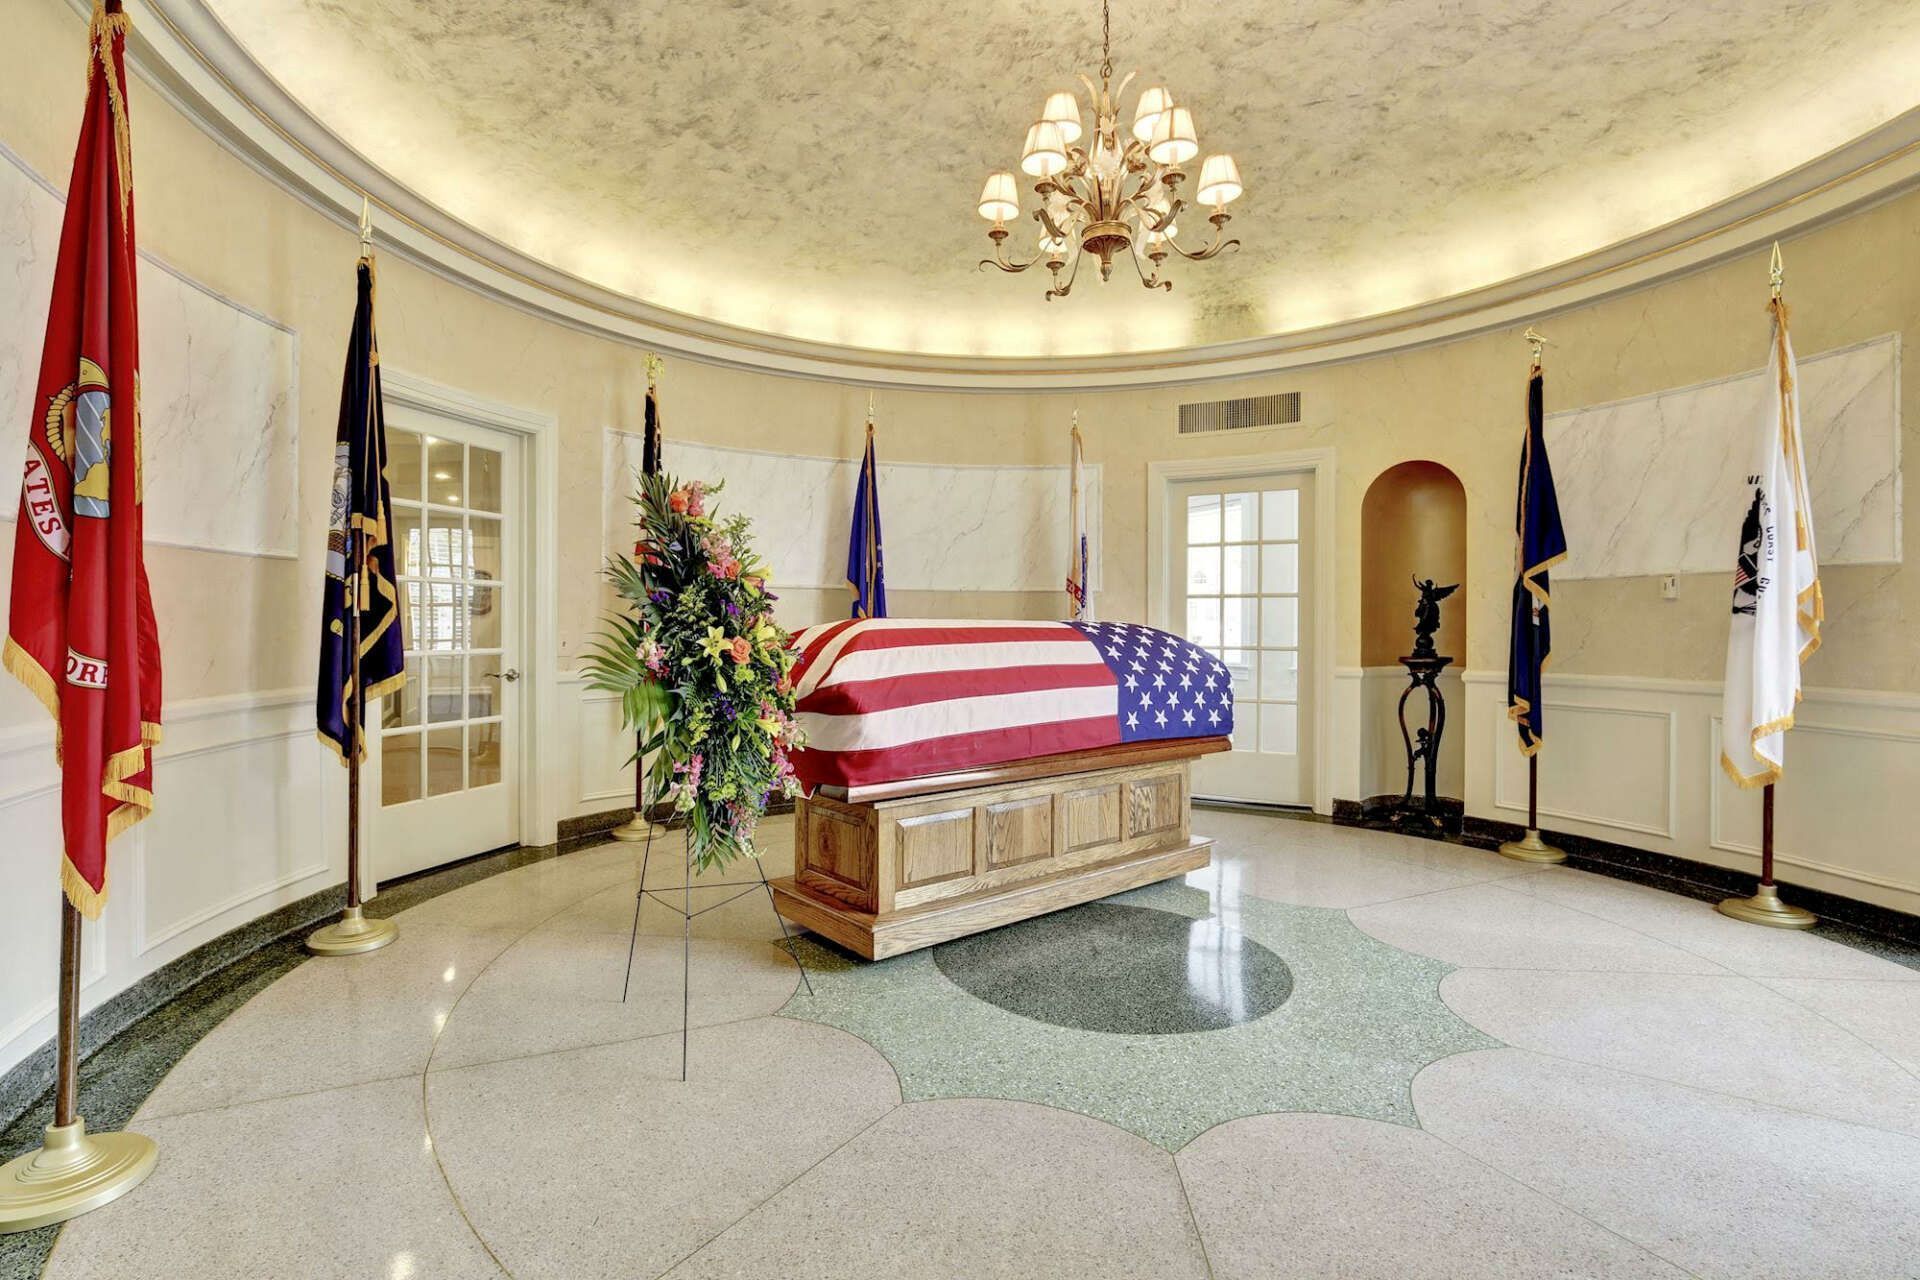 A coffin with an american flag on it is in a room with flags.